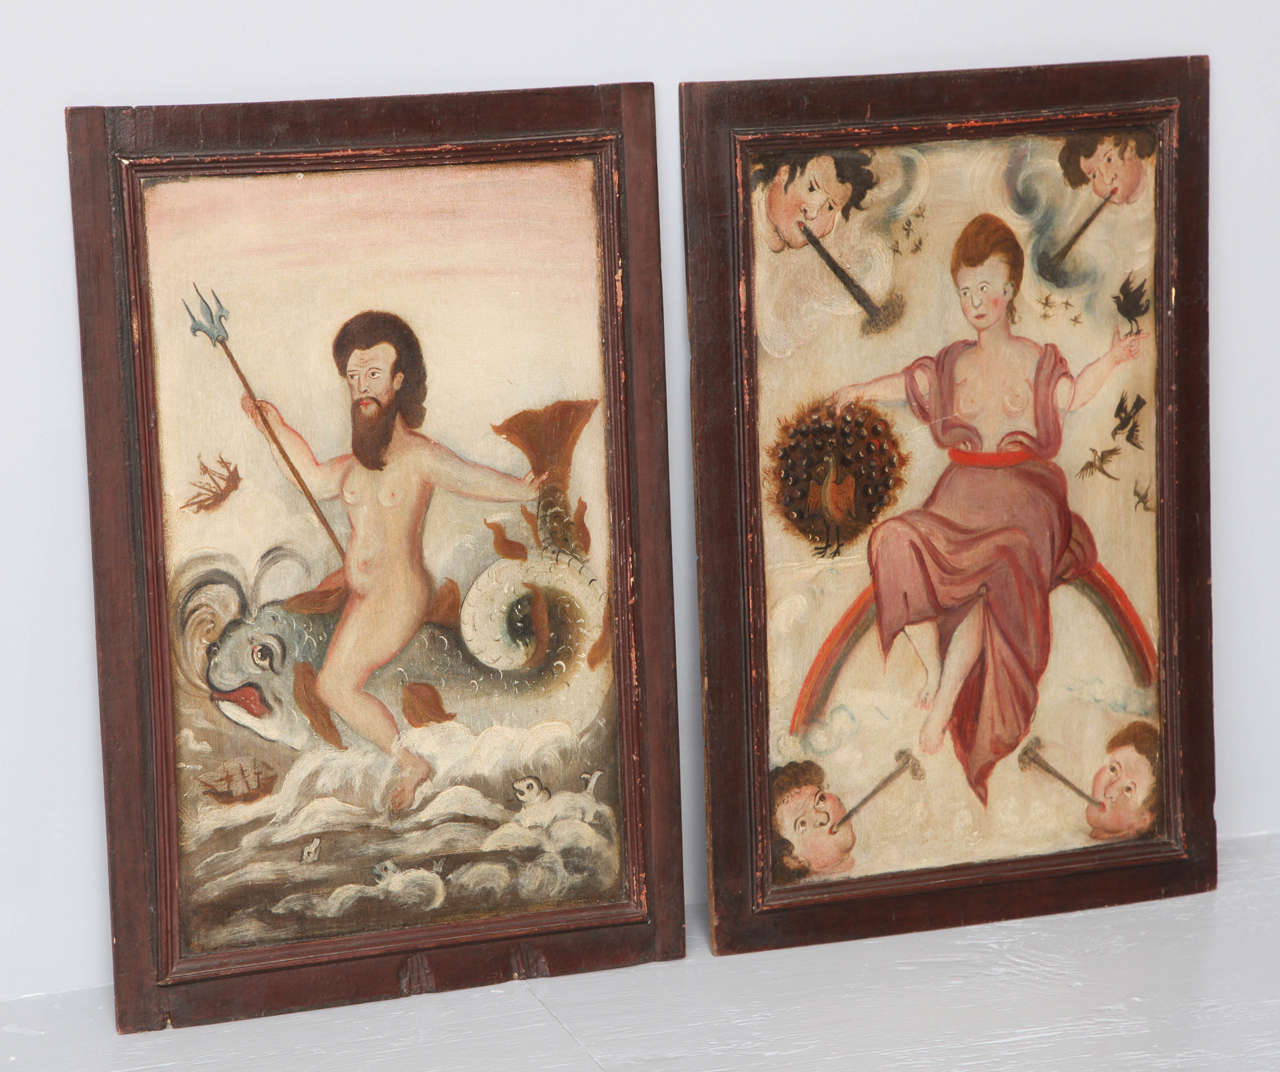 Unusual pair of 18th century folk art painted panels depicting Poseidon and Hera, he shown holding his trident sitting astride a dolphin and she sitting beside a peacock with heralds trumpeting in the corners. Possessing beautiful colors and having